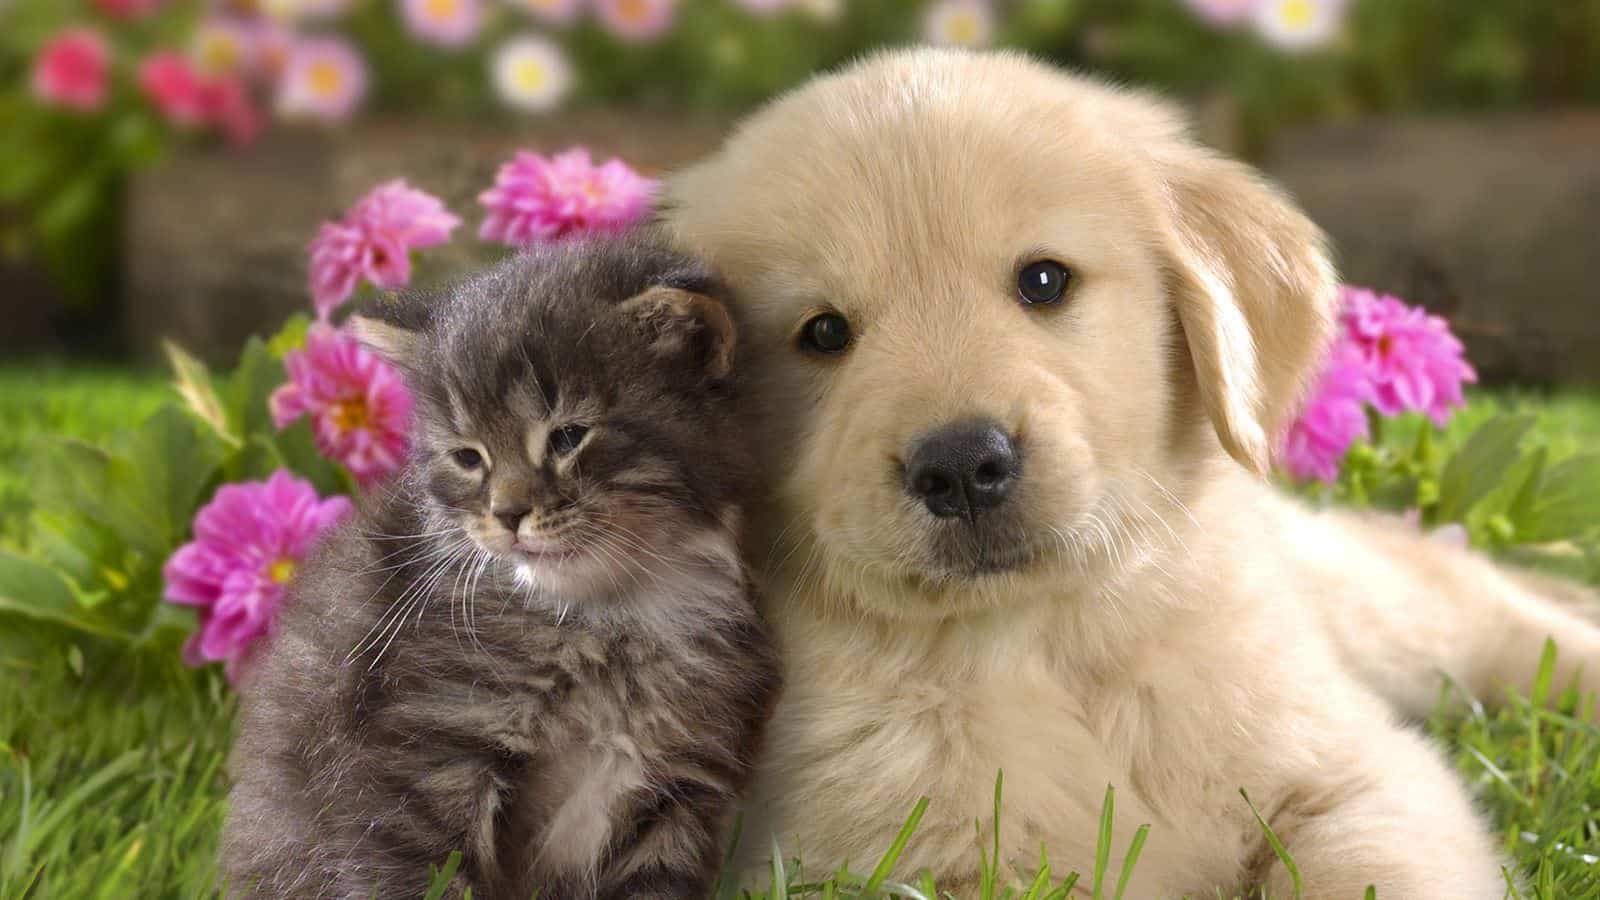 Very cute cat and dog together.